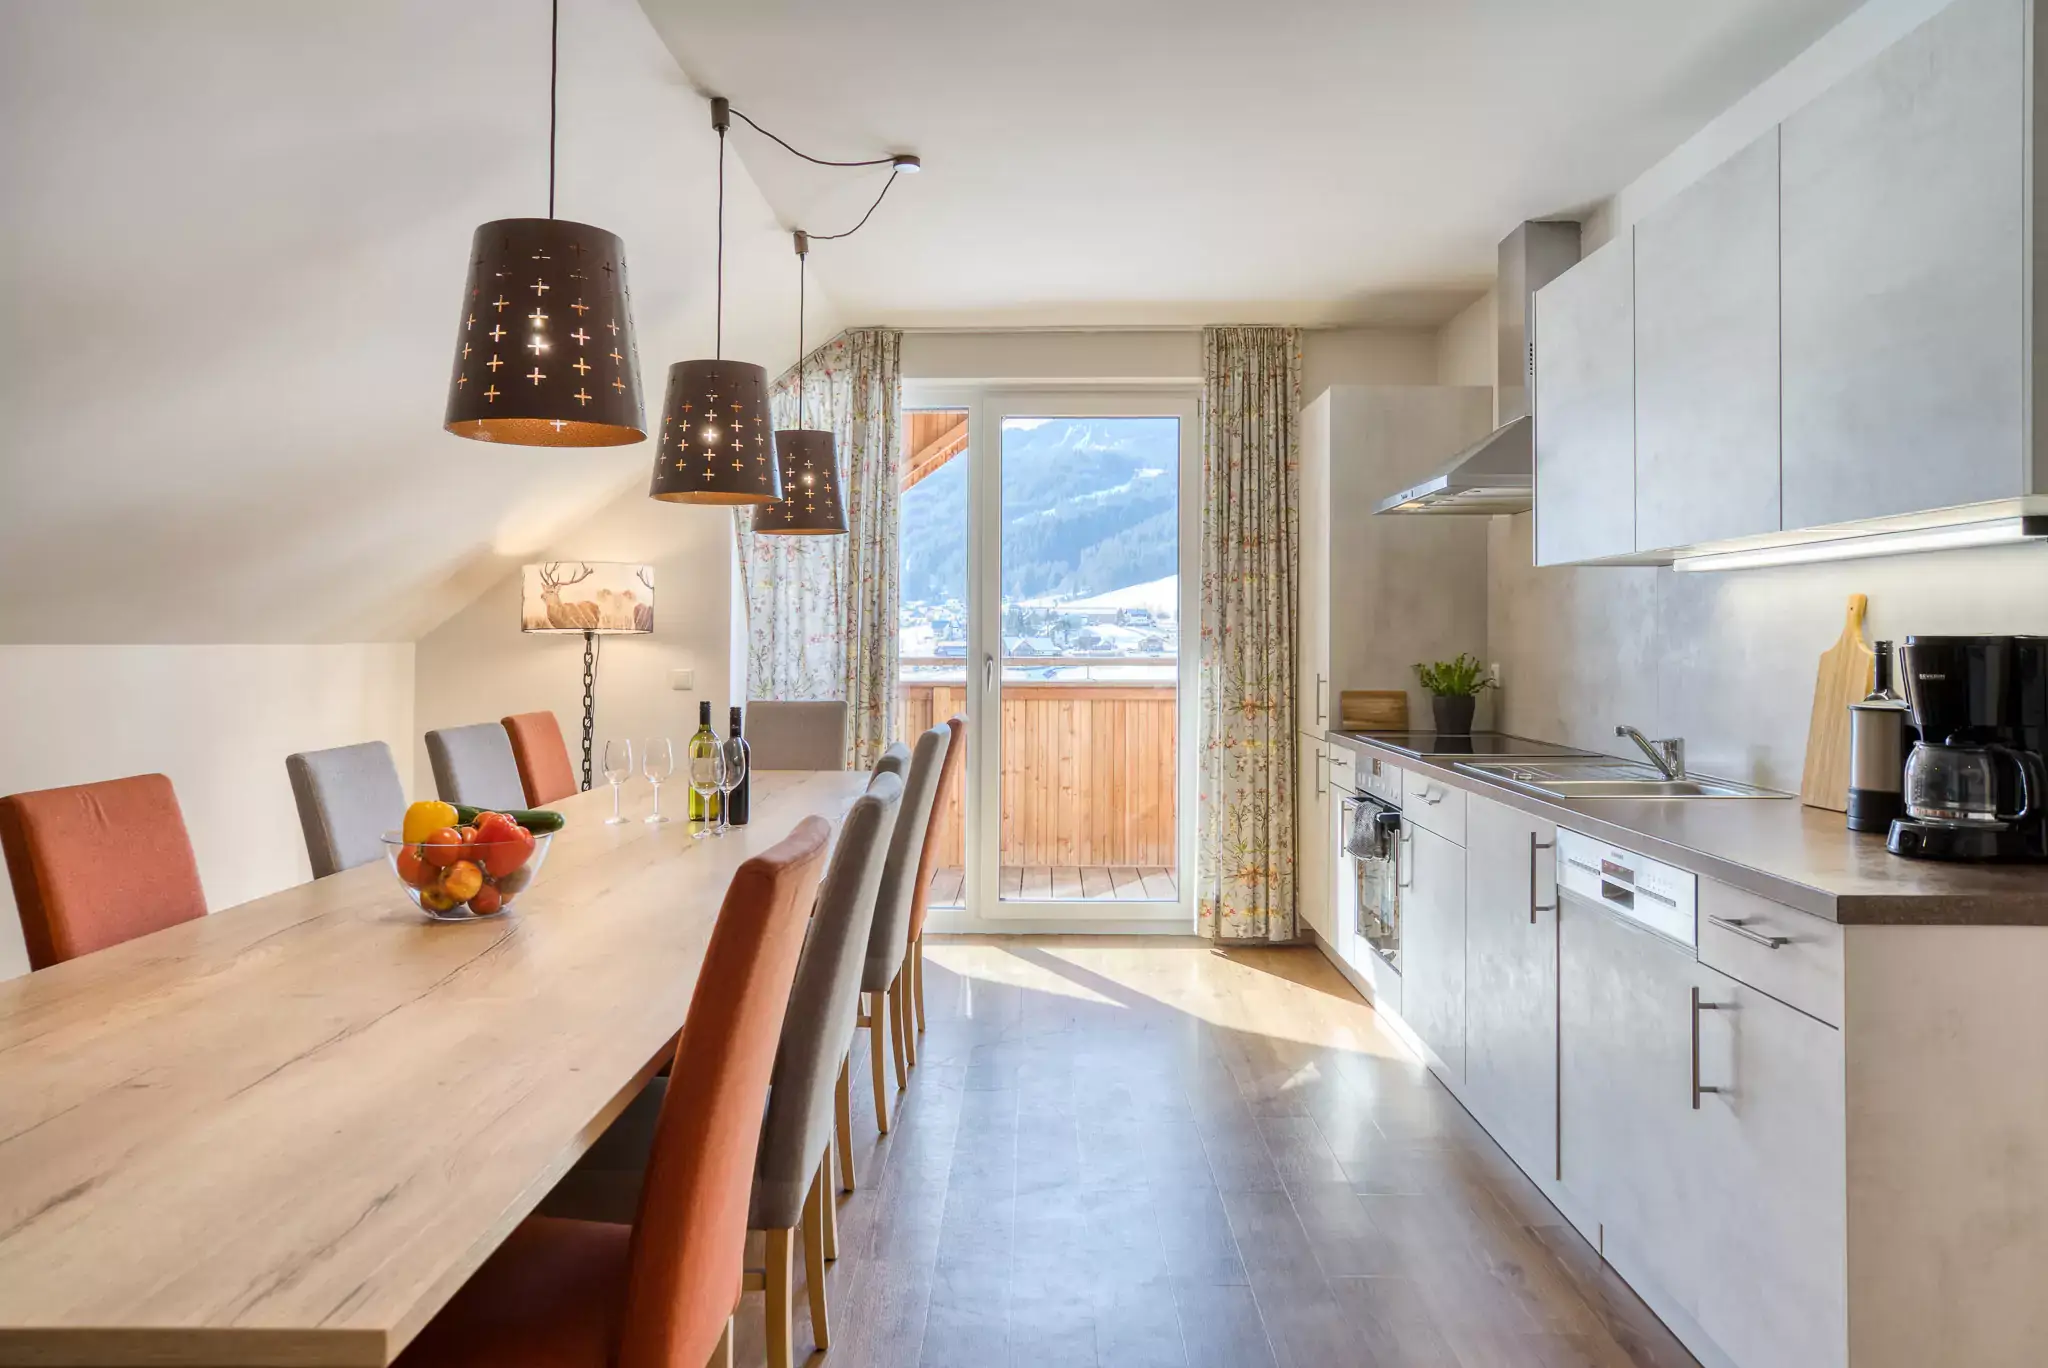 Kitchen of the apartment Skypine in the COOEE alpin Hotel Dachstein in Gosau.